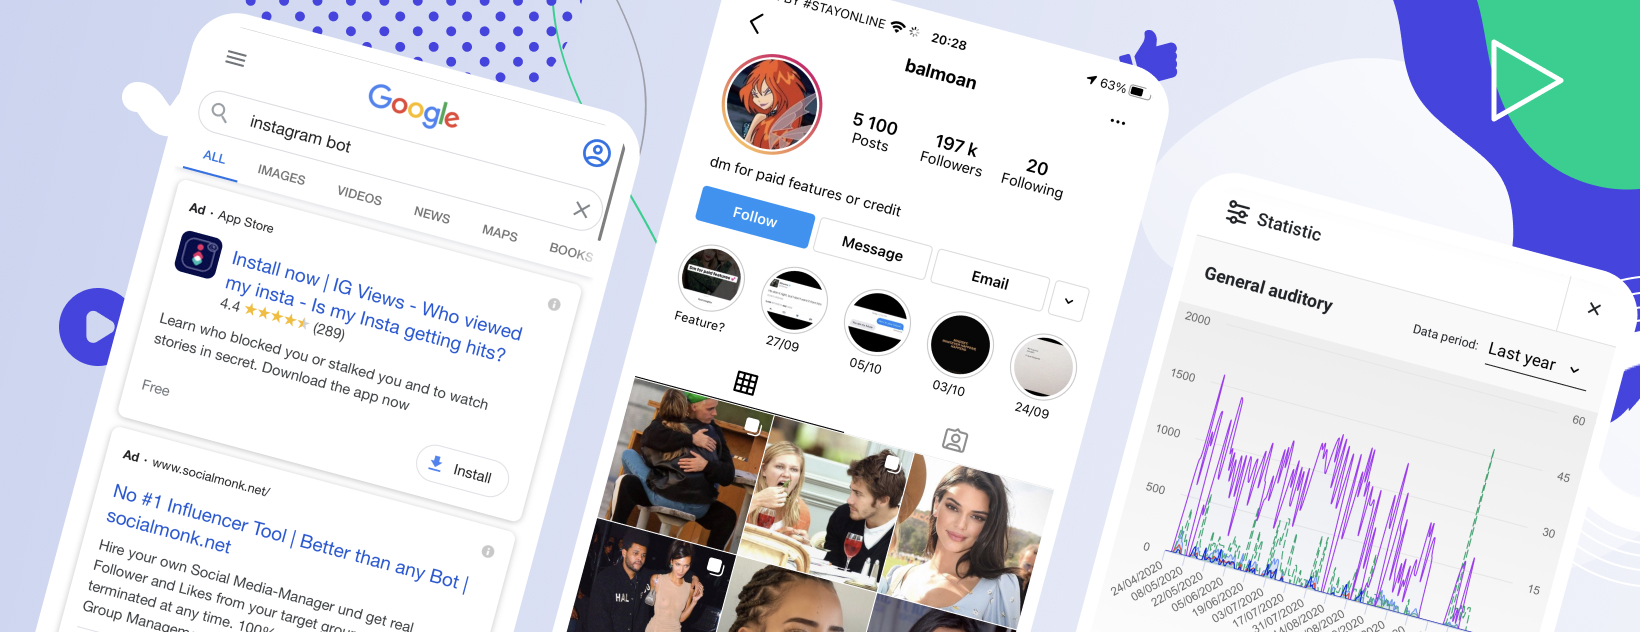 Get Instagram followers fast with a bot - is it real in 2020?